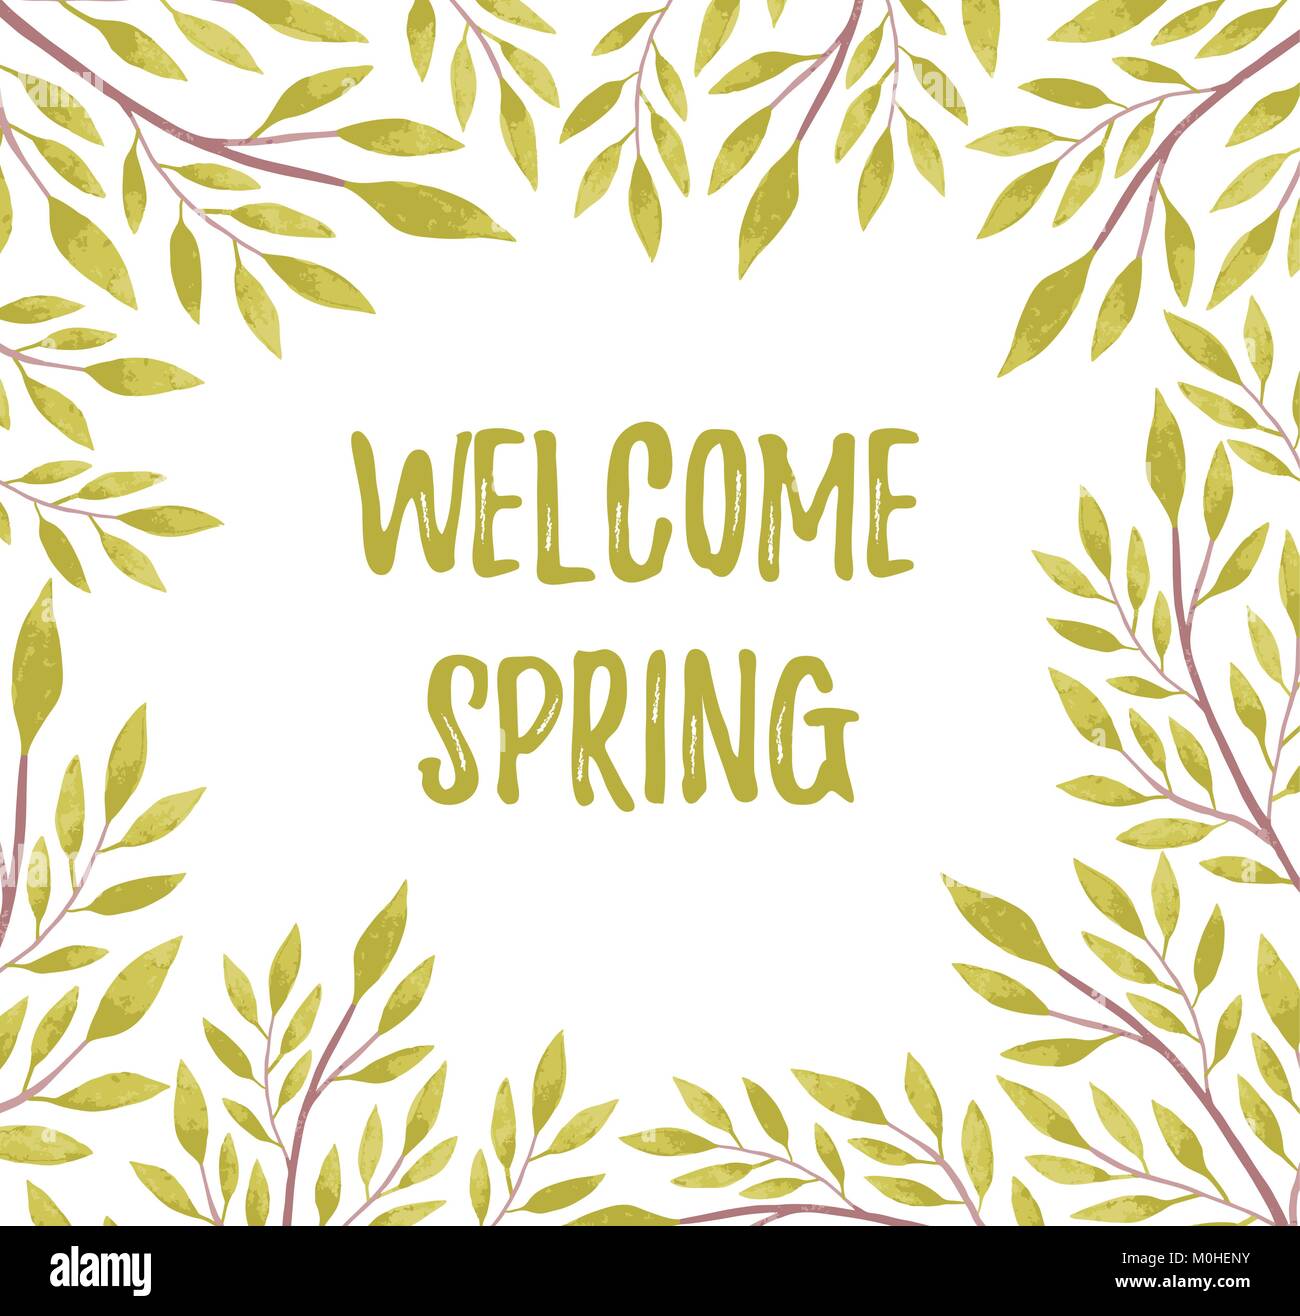 Welcome Spring watercolor vector lettering illustration Stock Vector